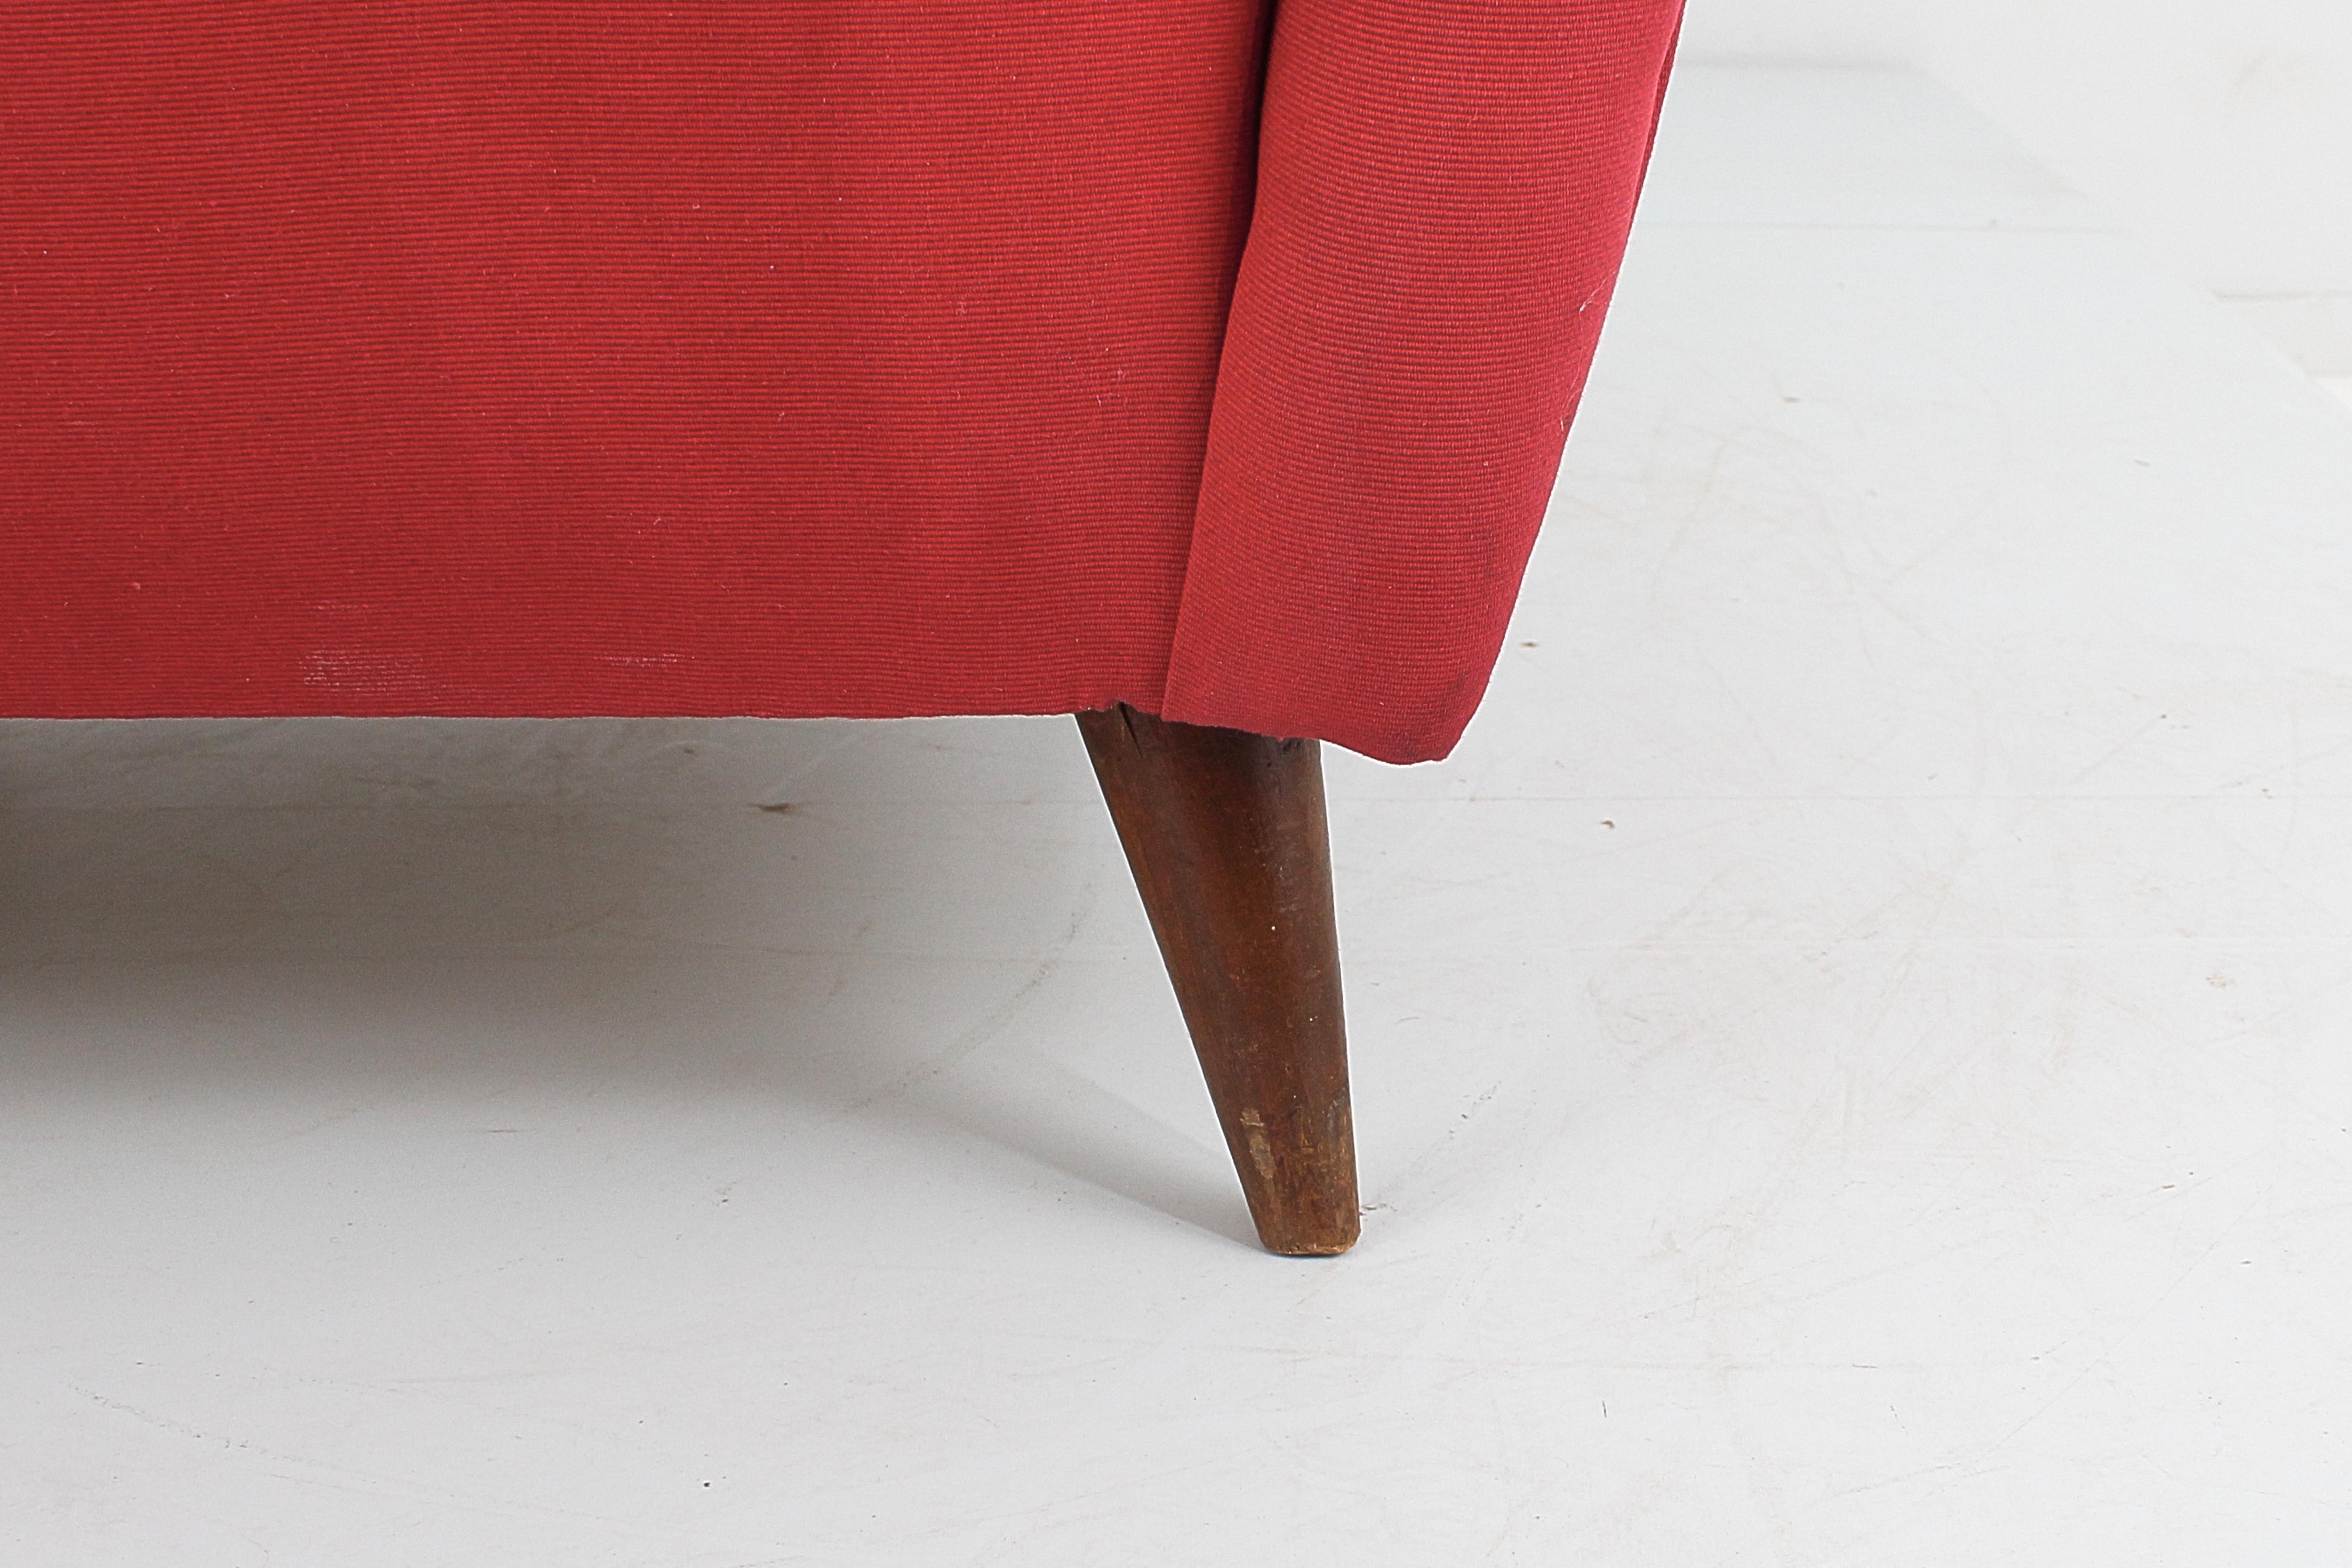 Midcentury Giò Ponti Style Wood and Red Fabric Armchair, circa 1950s Italy  For Sale 7